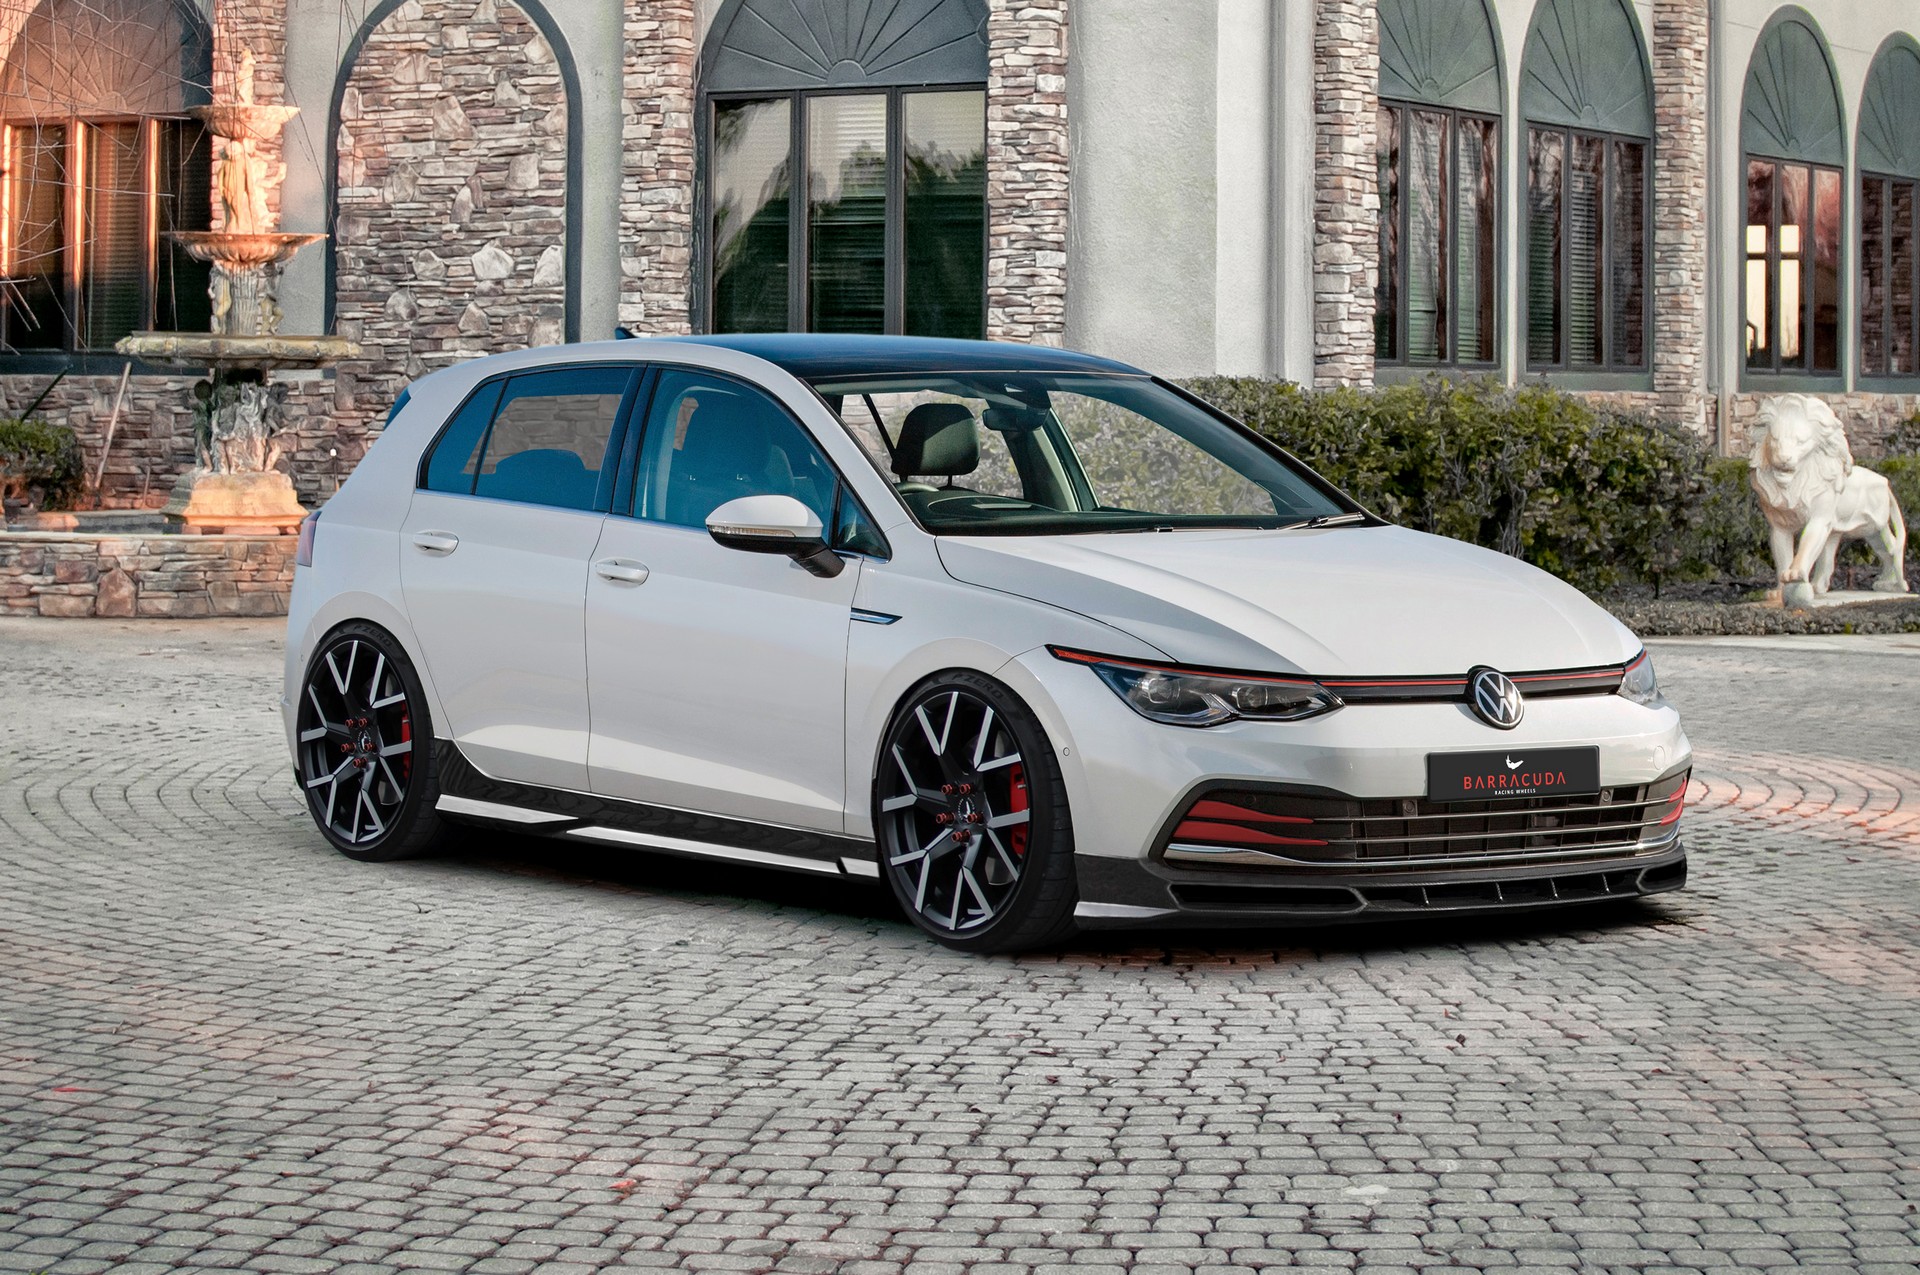 New 2020 VW Golf Mk8 Tuning Program Previewed By JMS